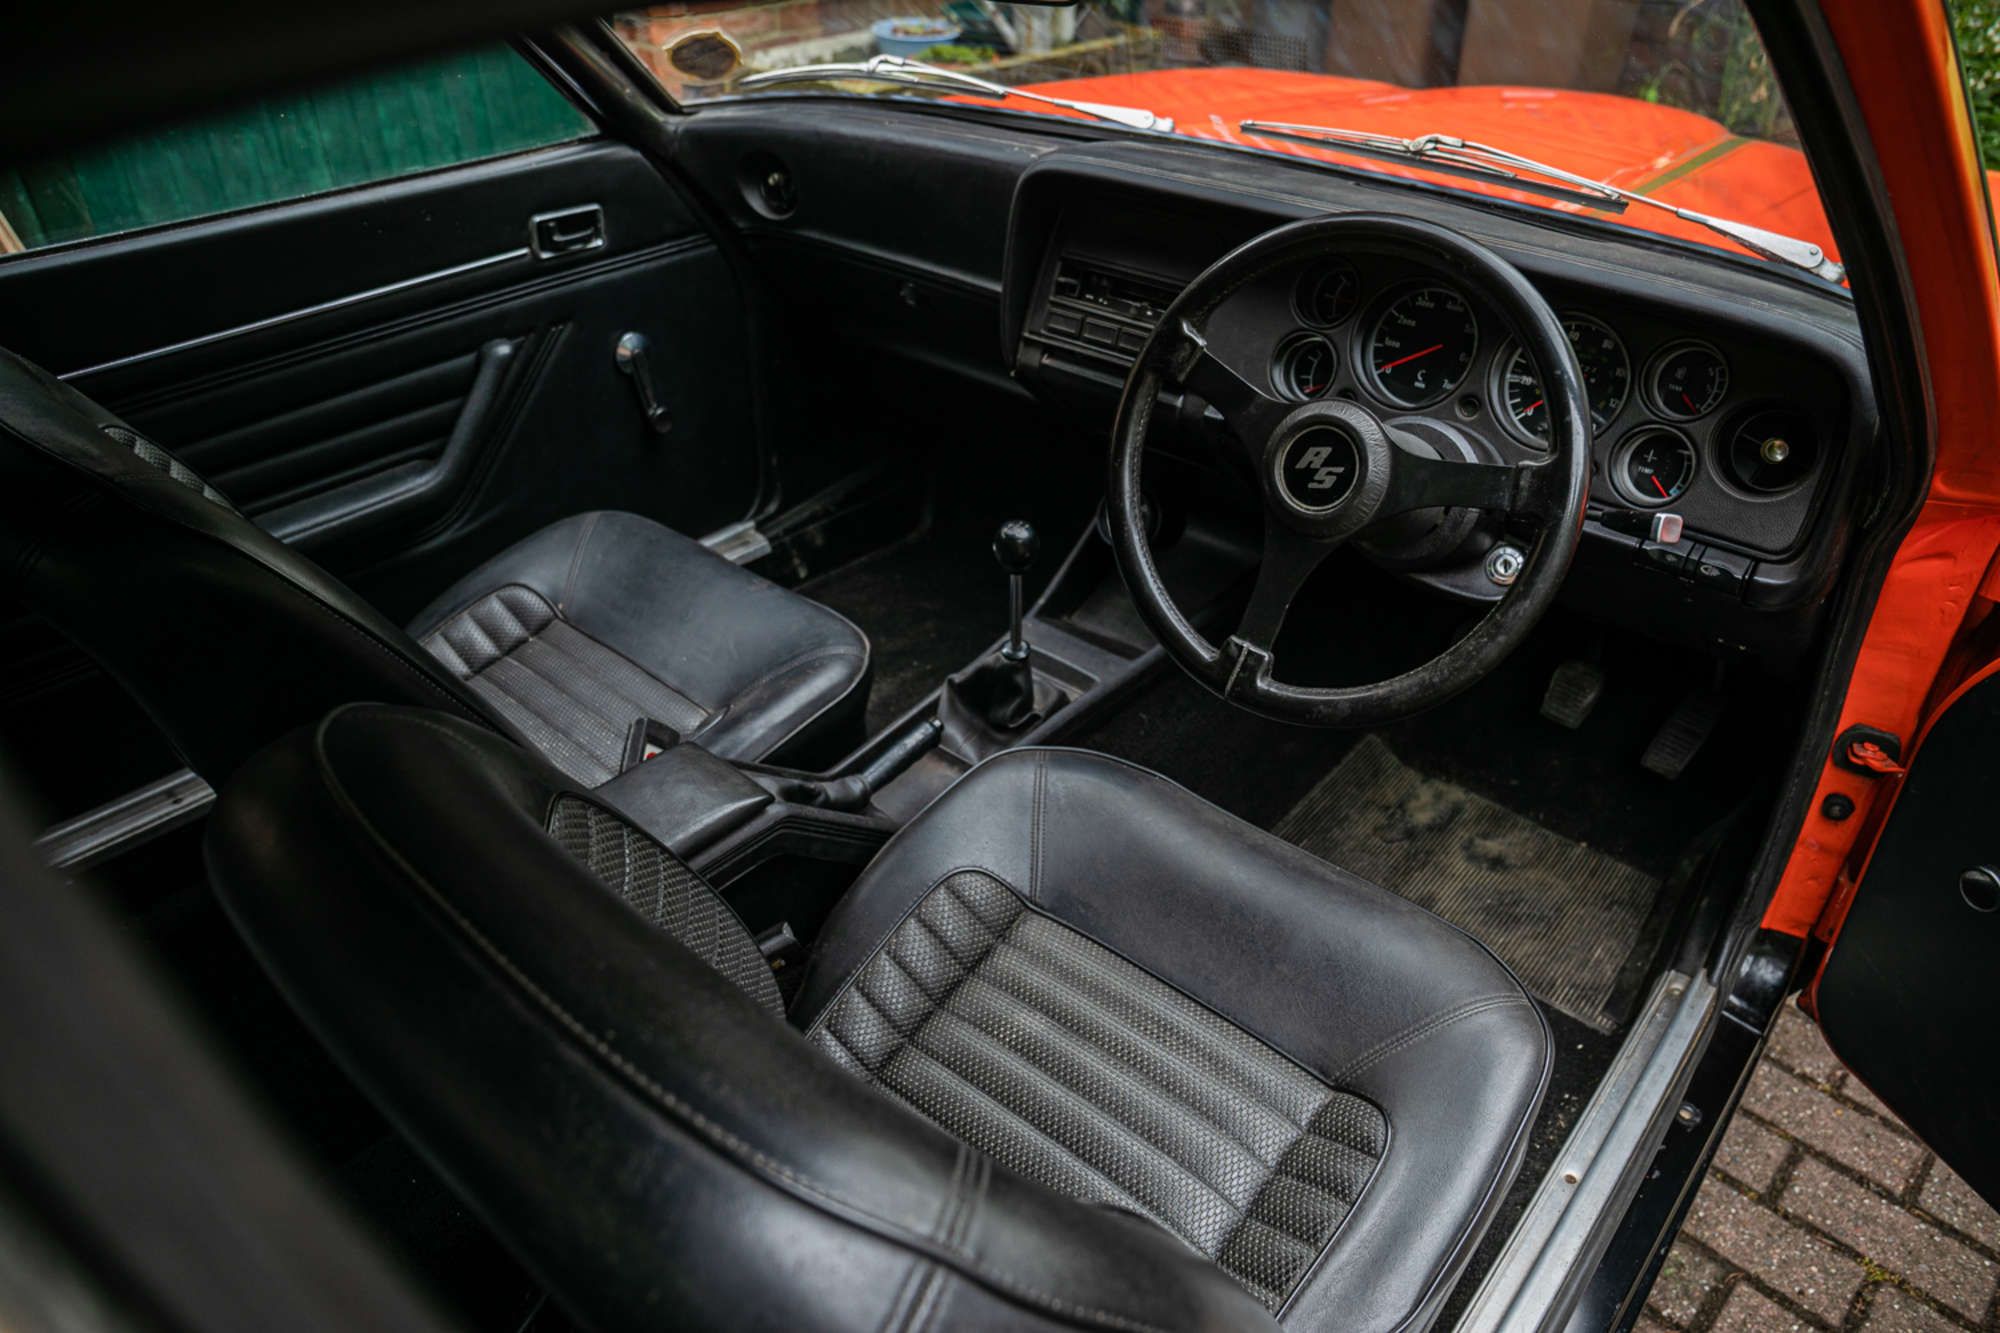 The interior of the 1975 Ford Capri RS3100.